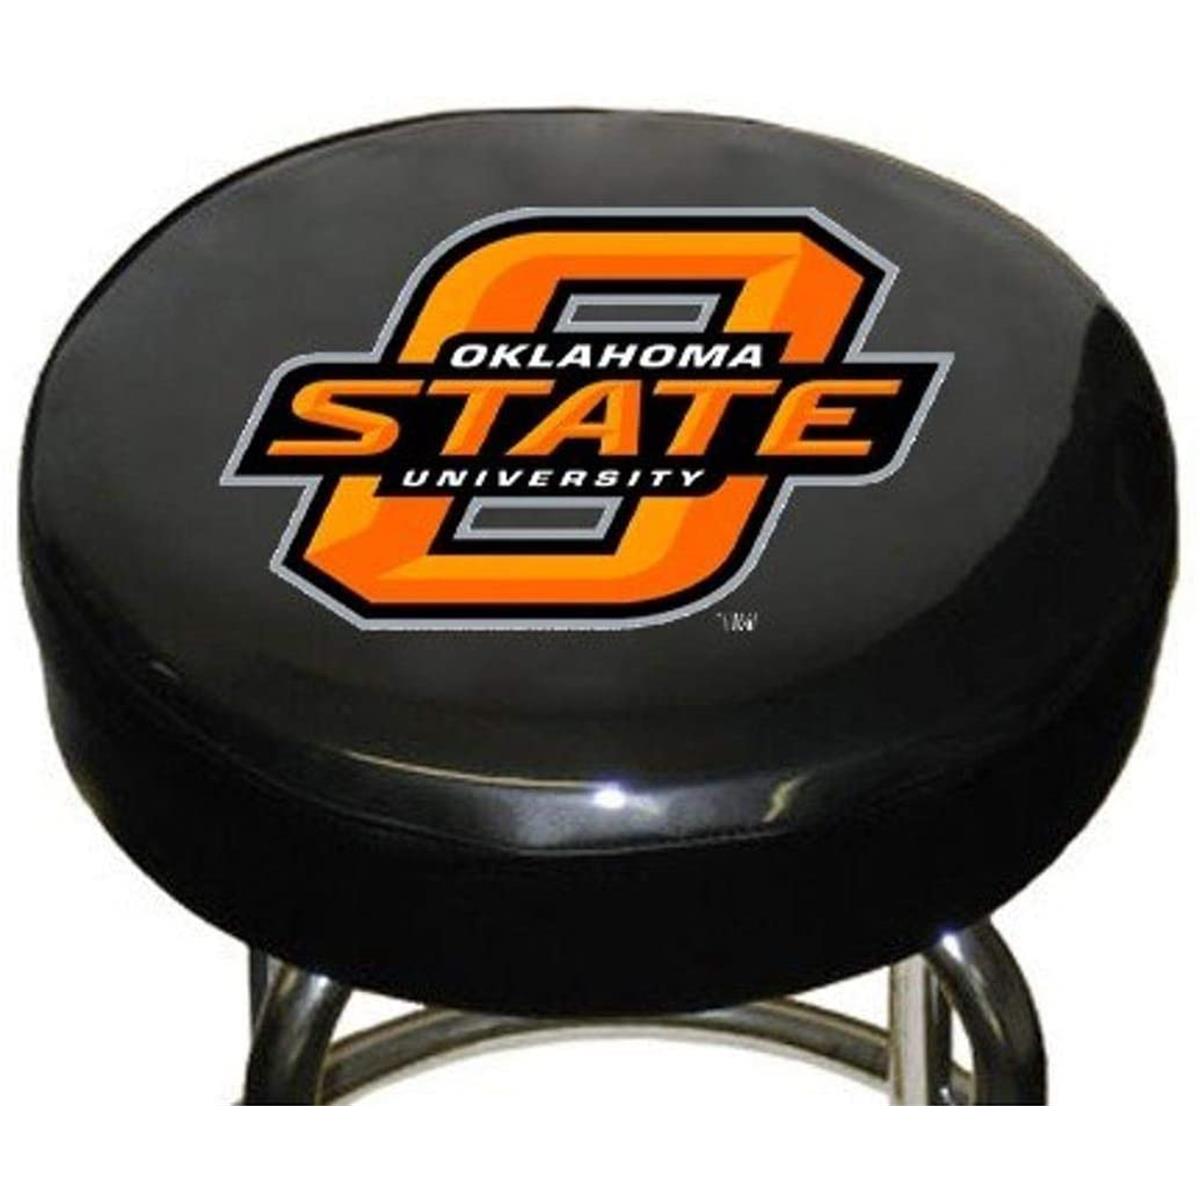 Picture of Fremont Die 2324555152 Oklahoma State Cowboys Bar Stool Cover